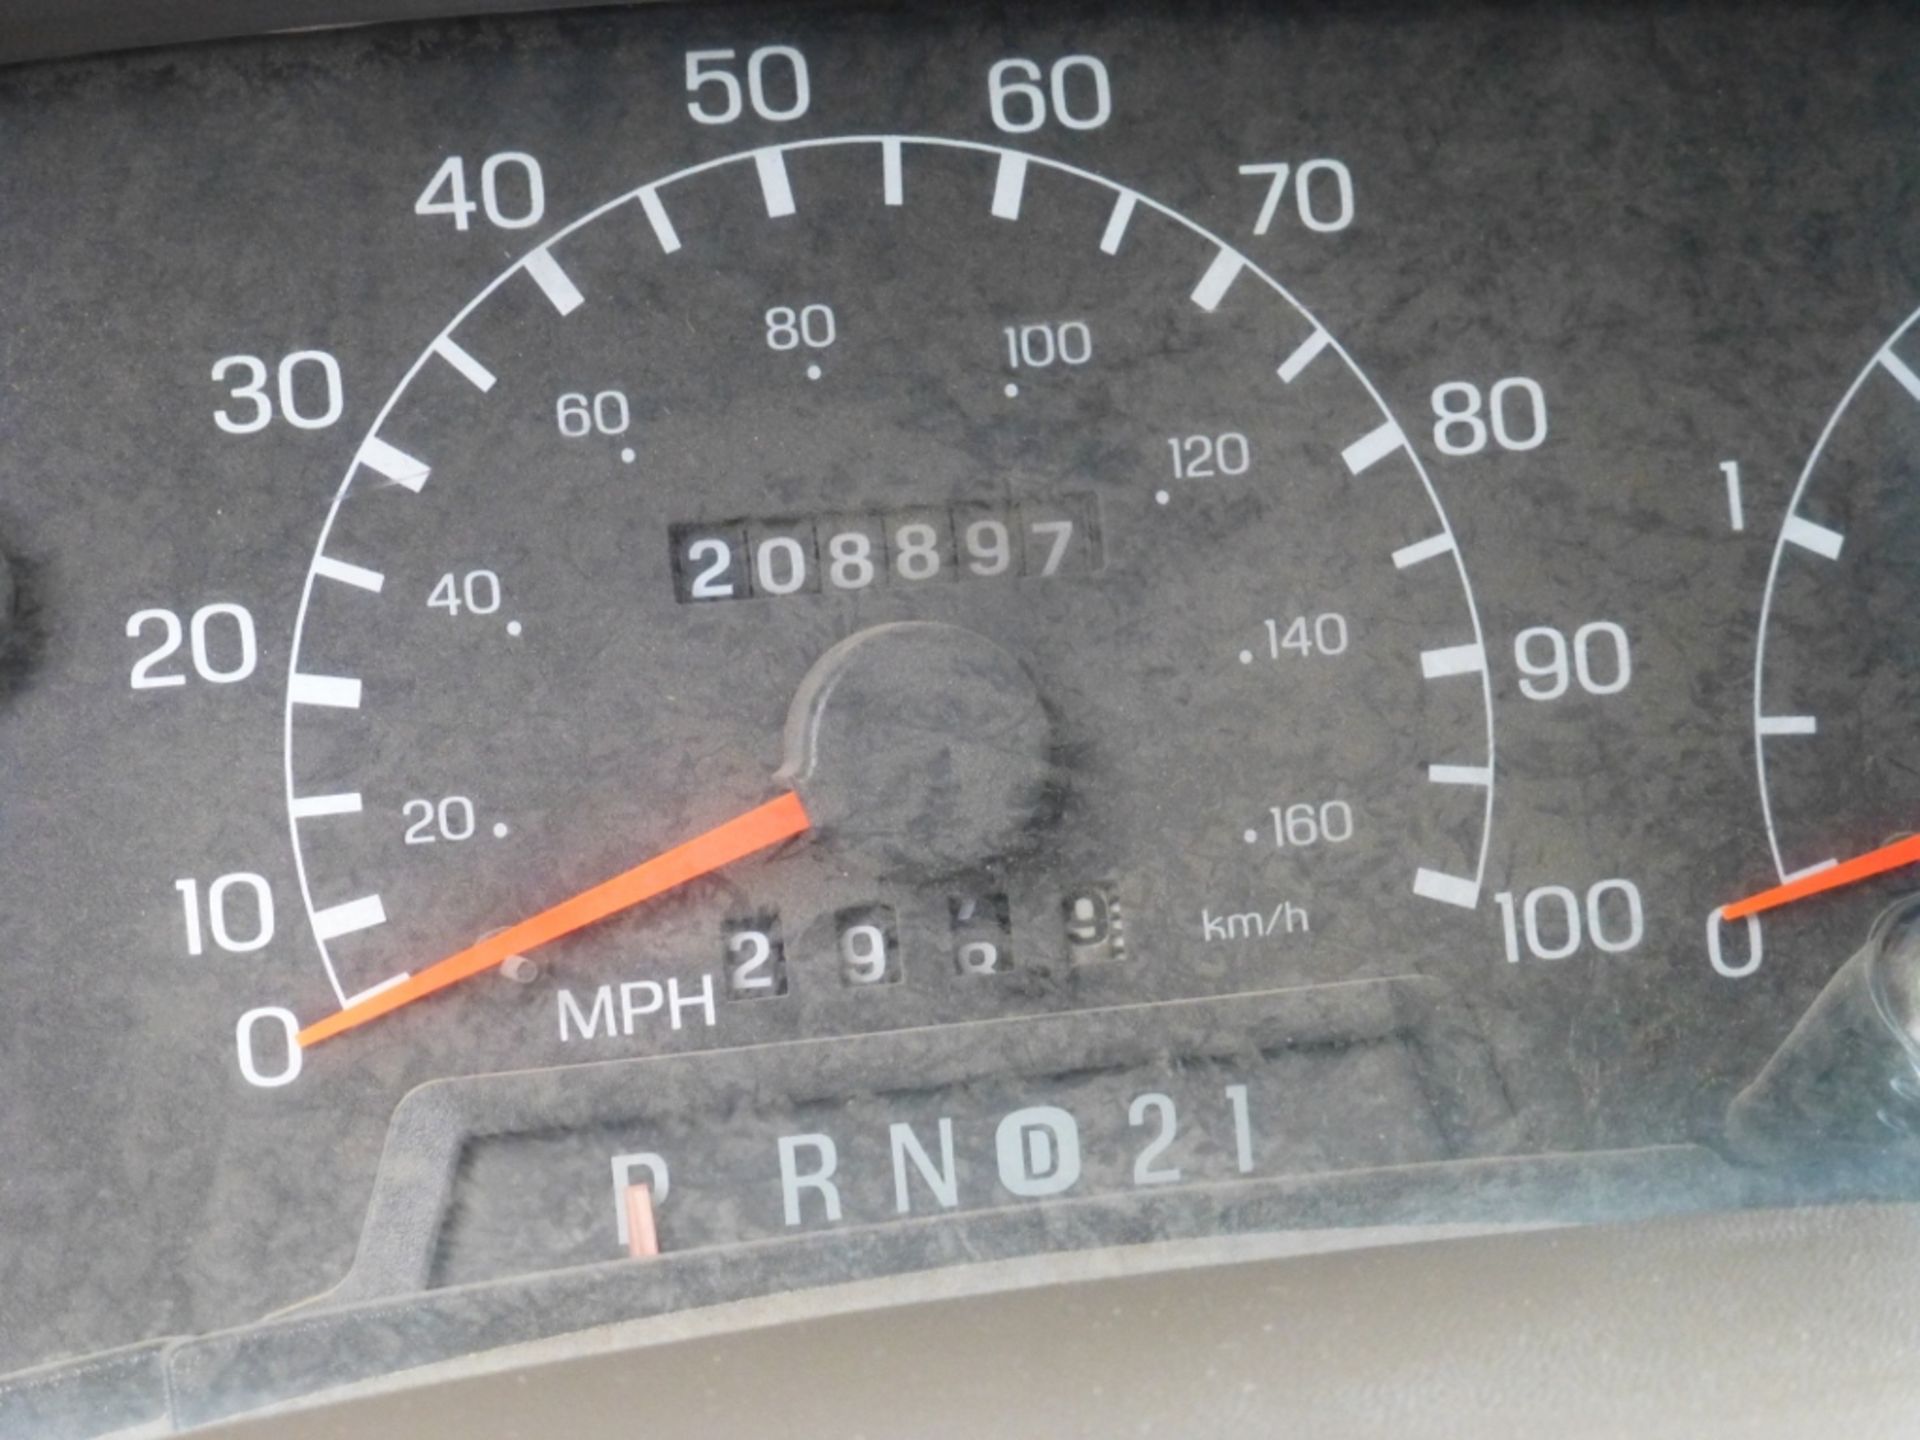 1999 Ford F350 Lariat Crew Cab, 4x4, 7.3 Diesel engine, 208,897 unverified miles, w/ utility bed. - Image 9 of 22